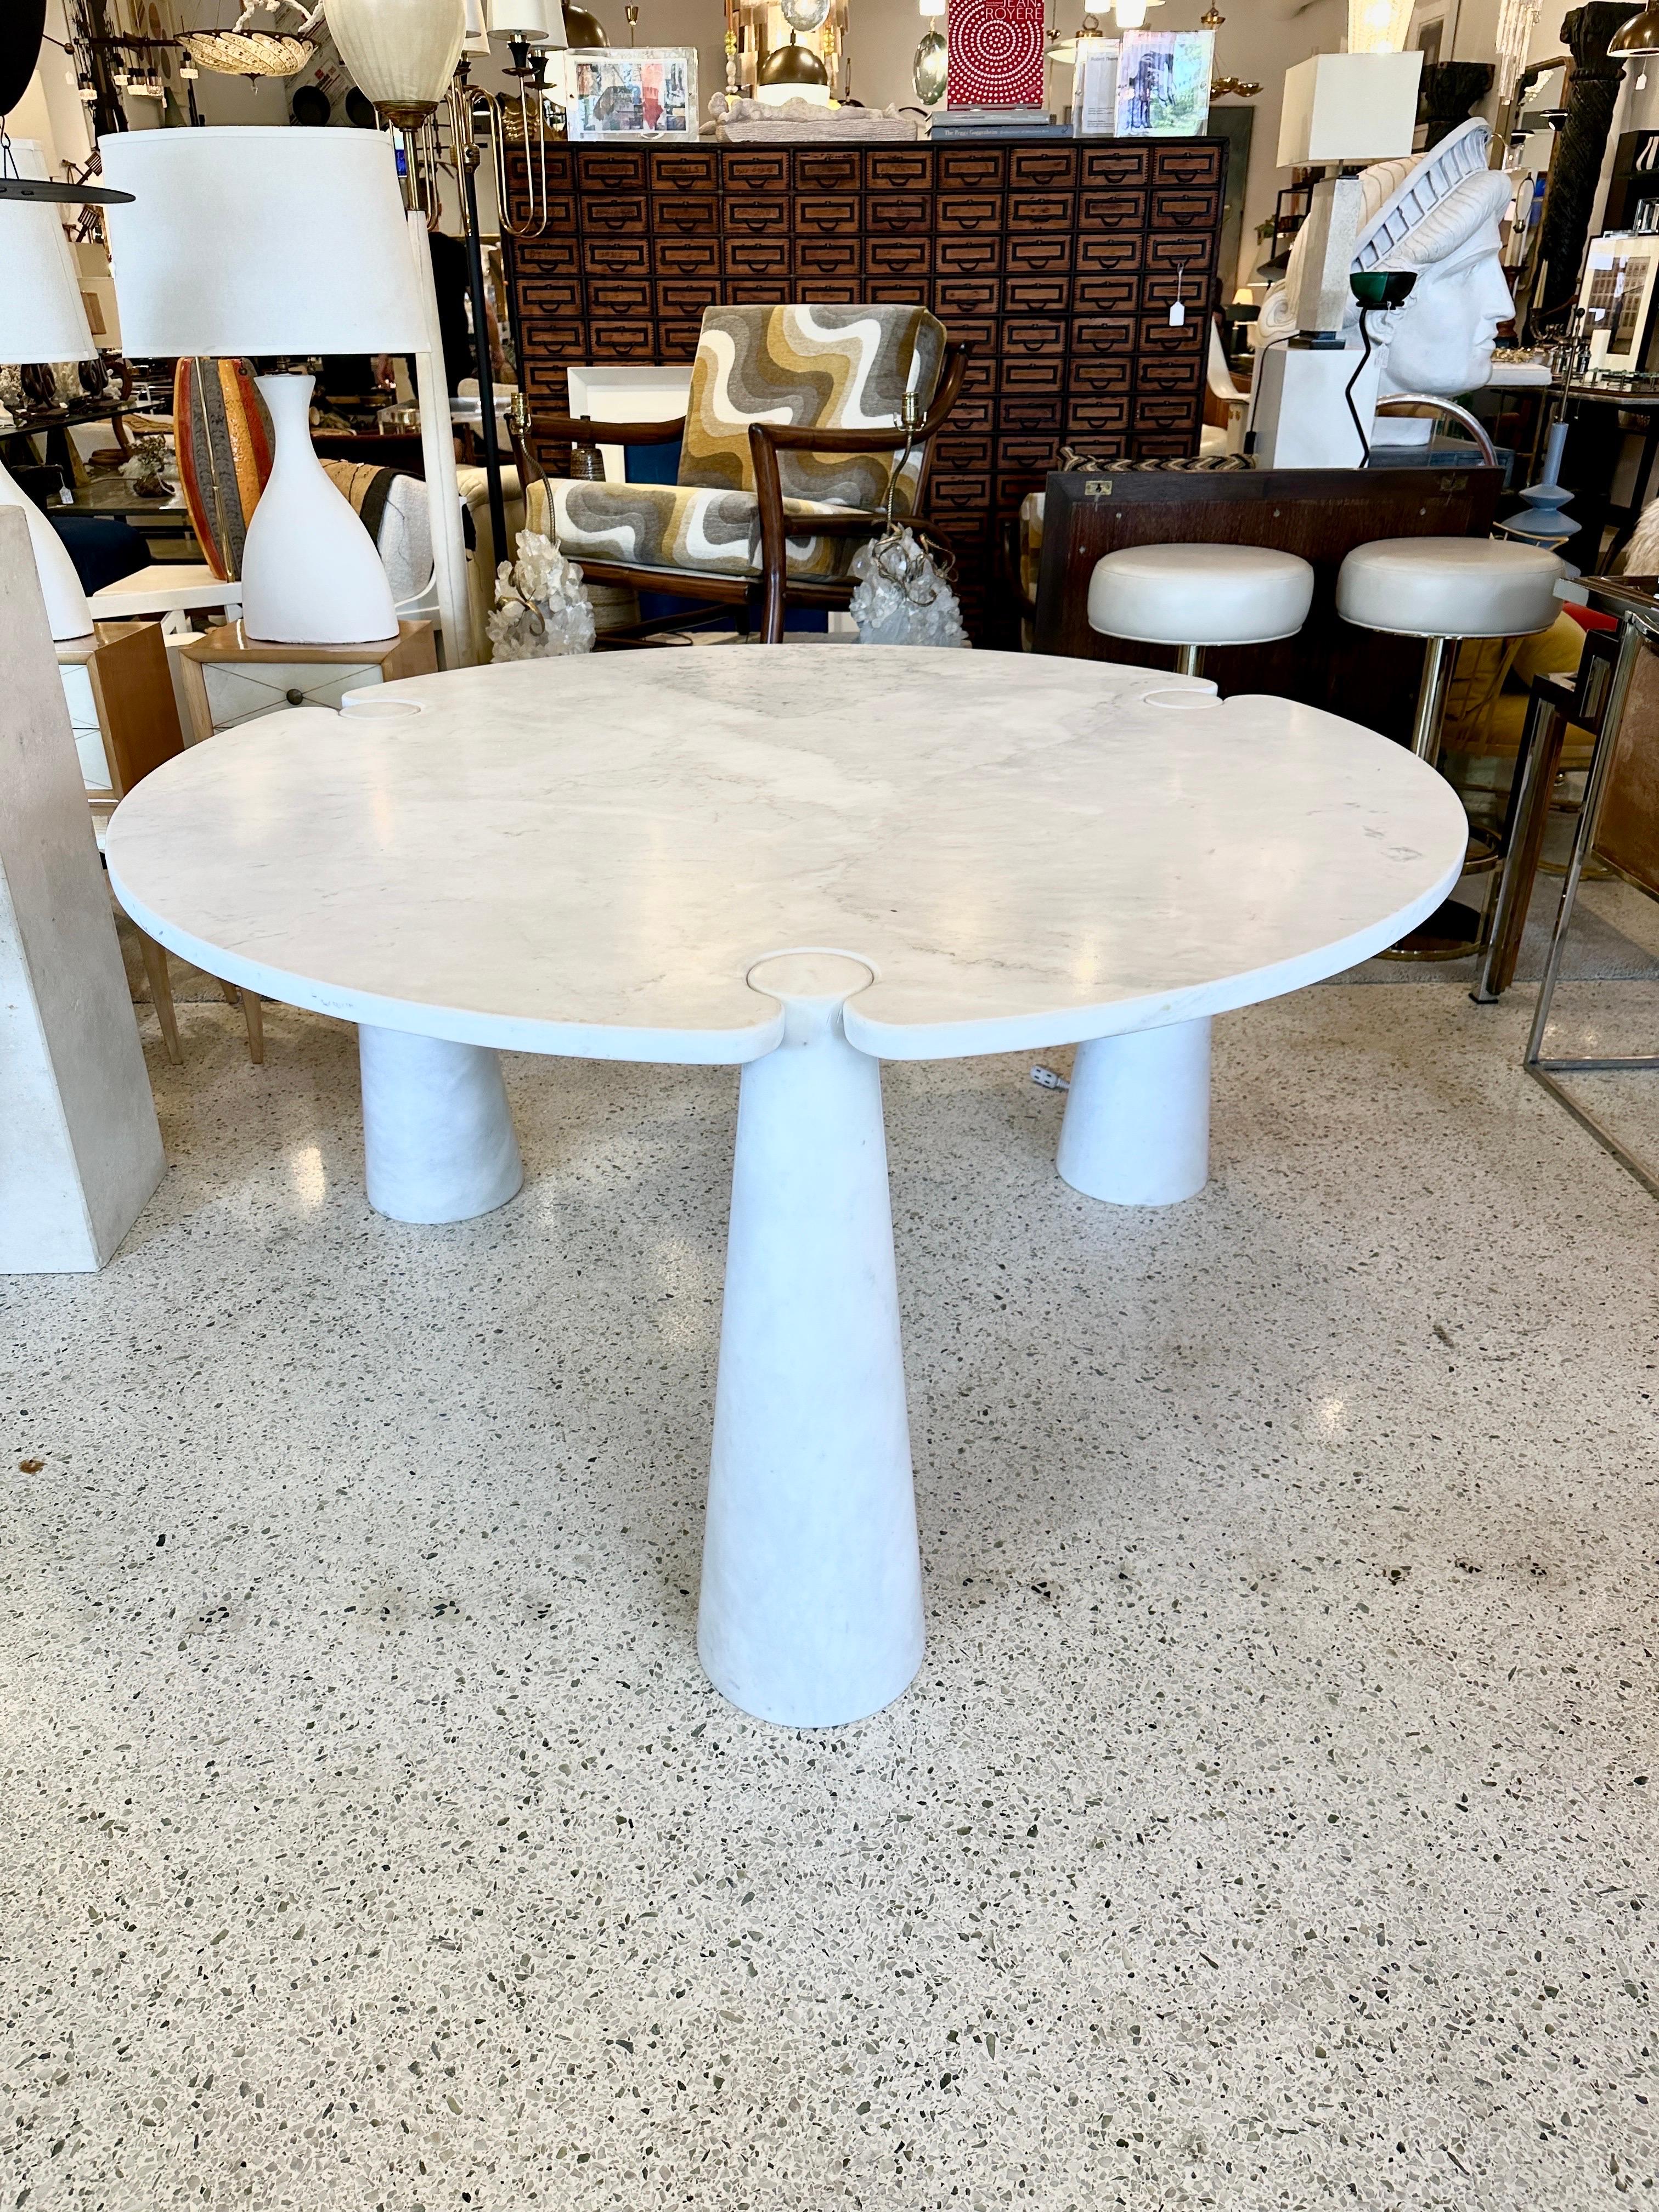 Carrara Marble Angelo Mangiarotti 'Eros' Round Marble Dining Table, Italy, 1970s For Sale